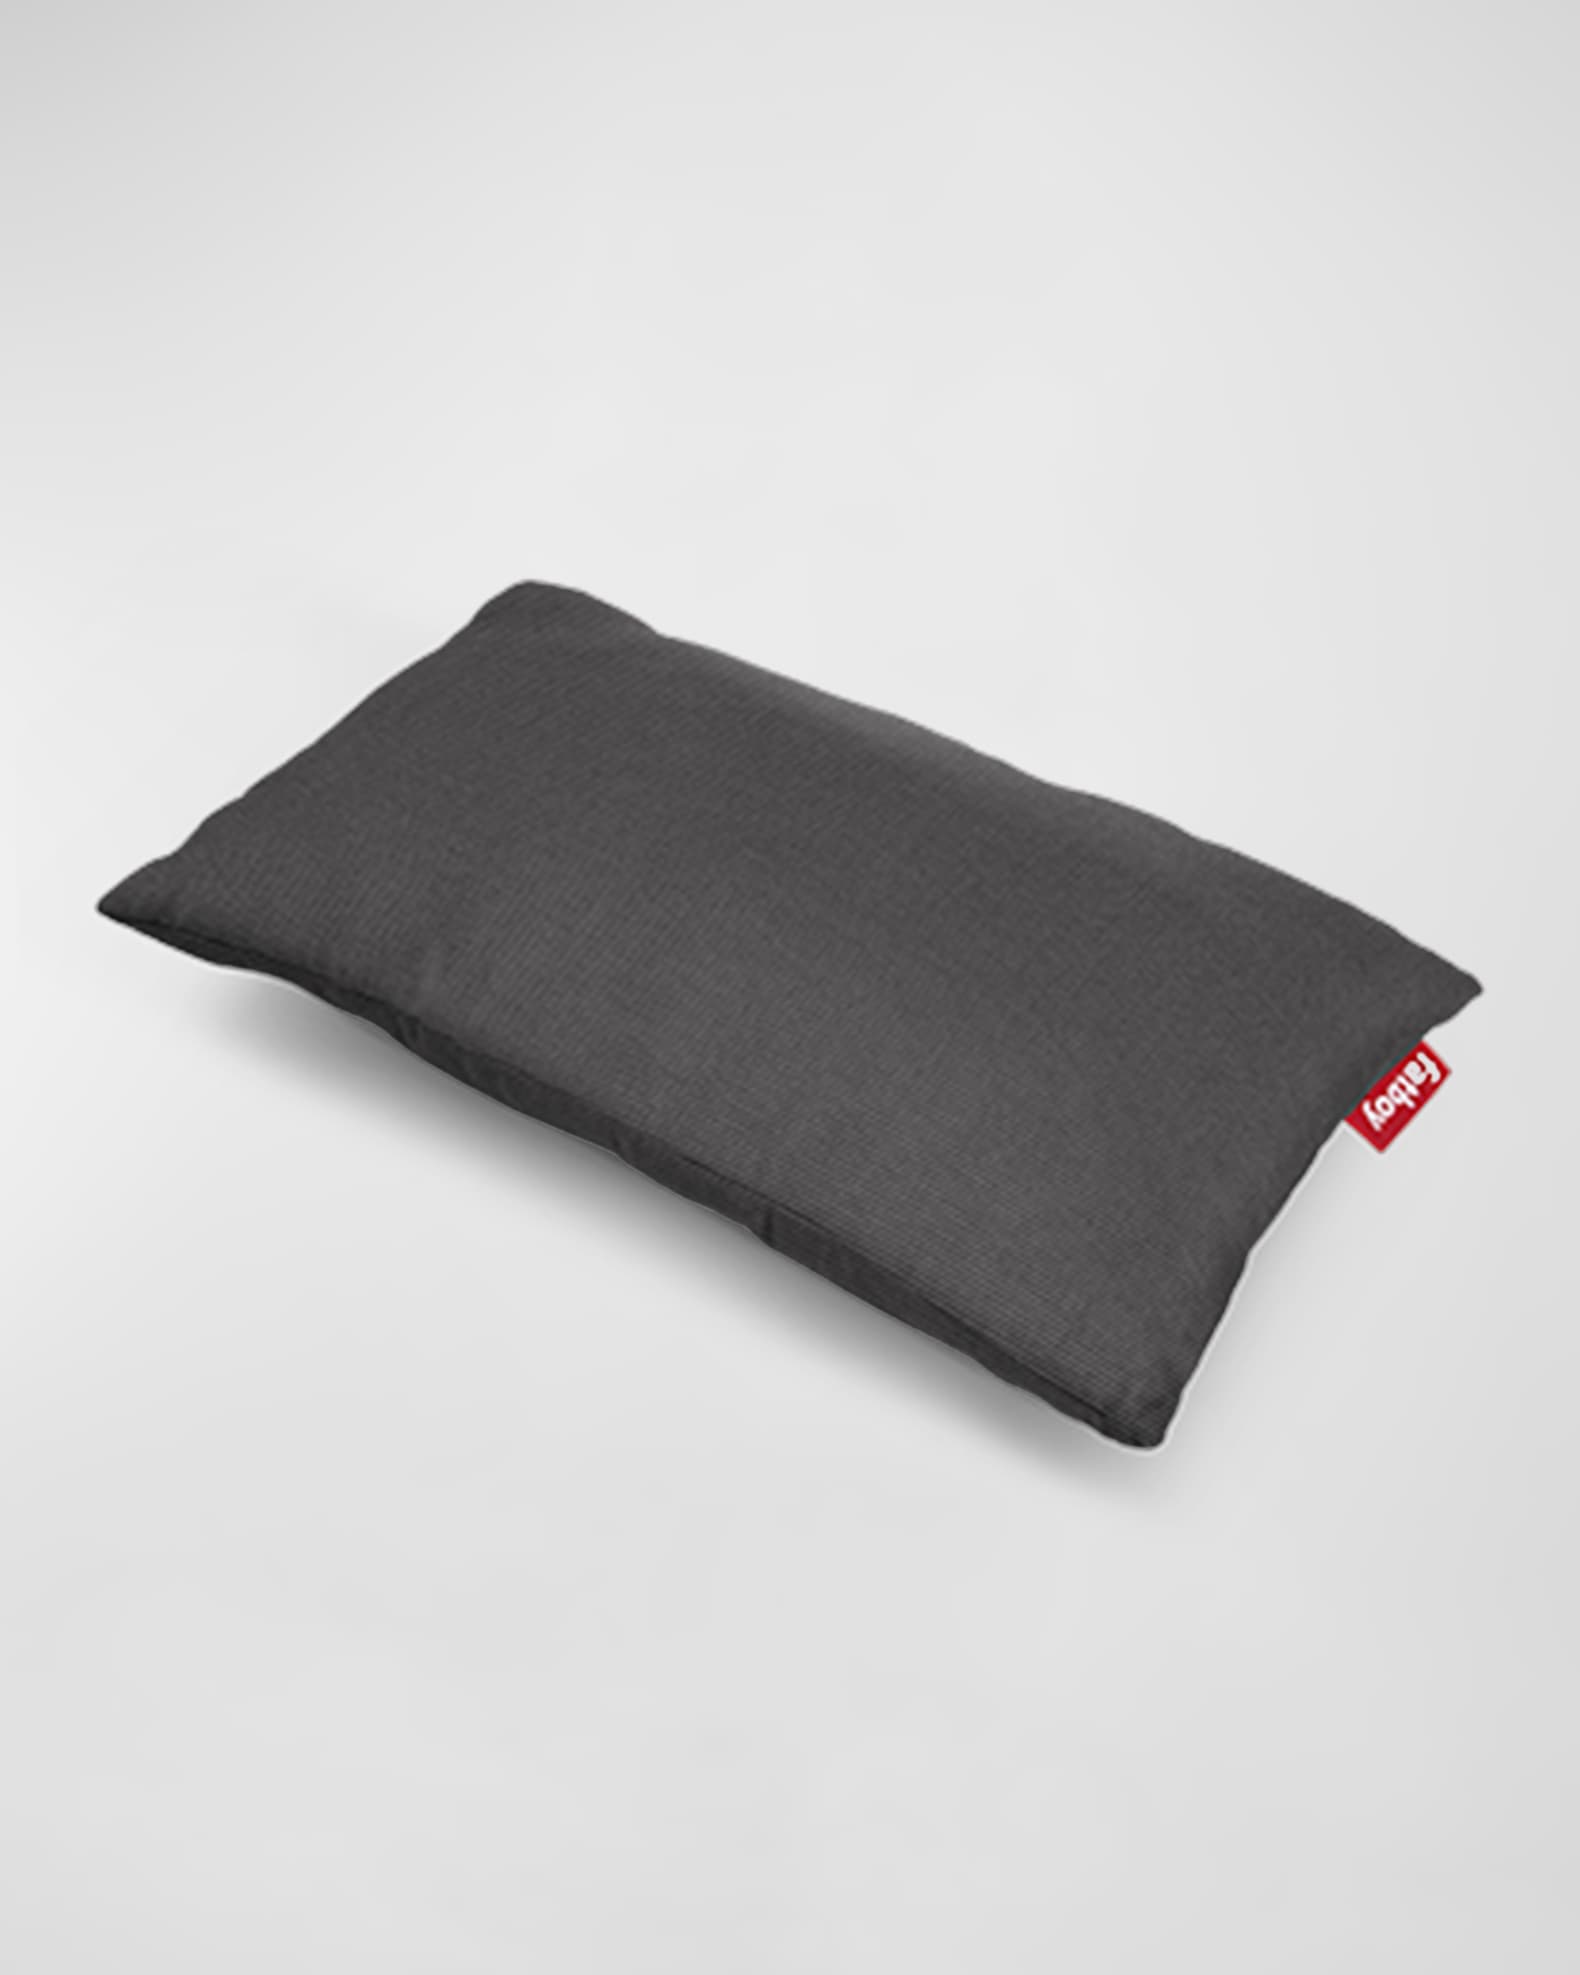 Fatboy Pillow King Outdoor, Blossom, 56% OFF